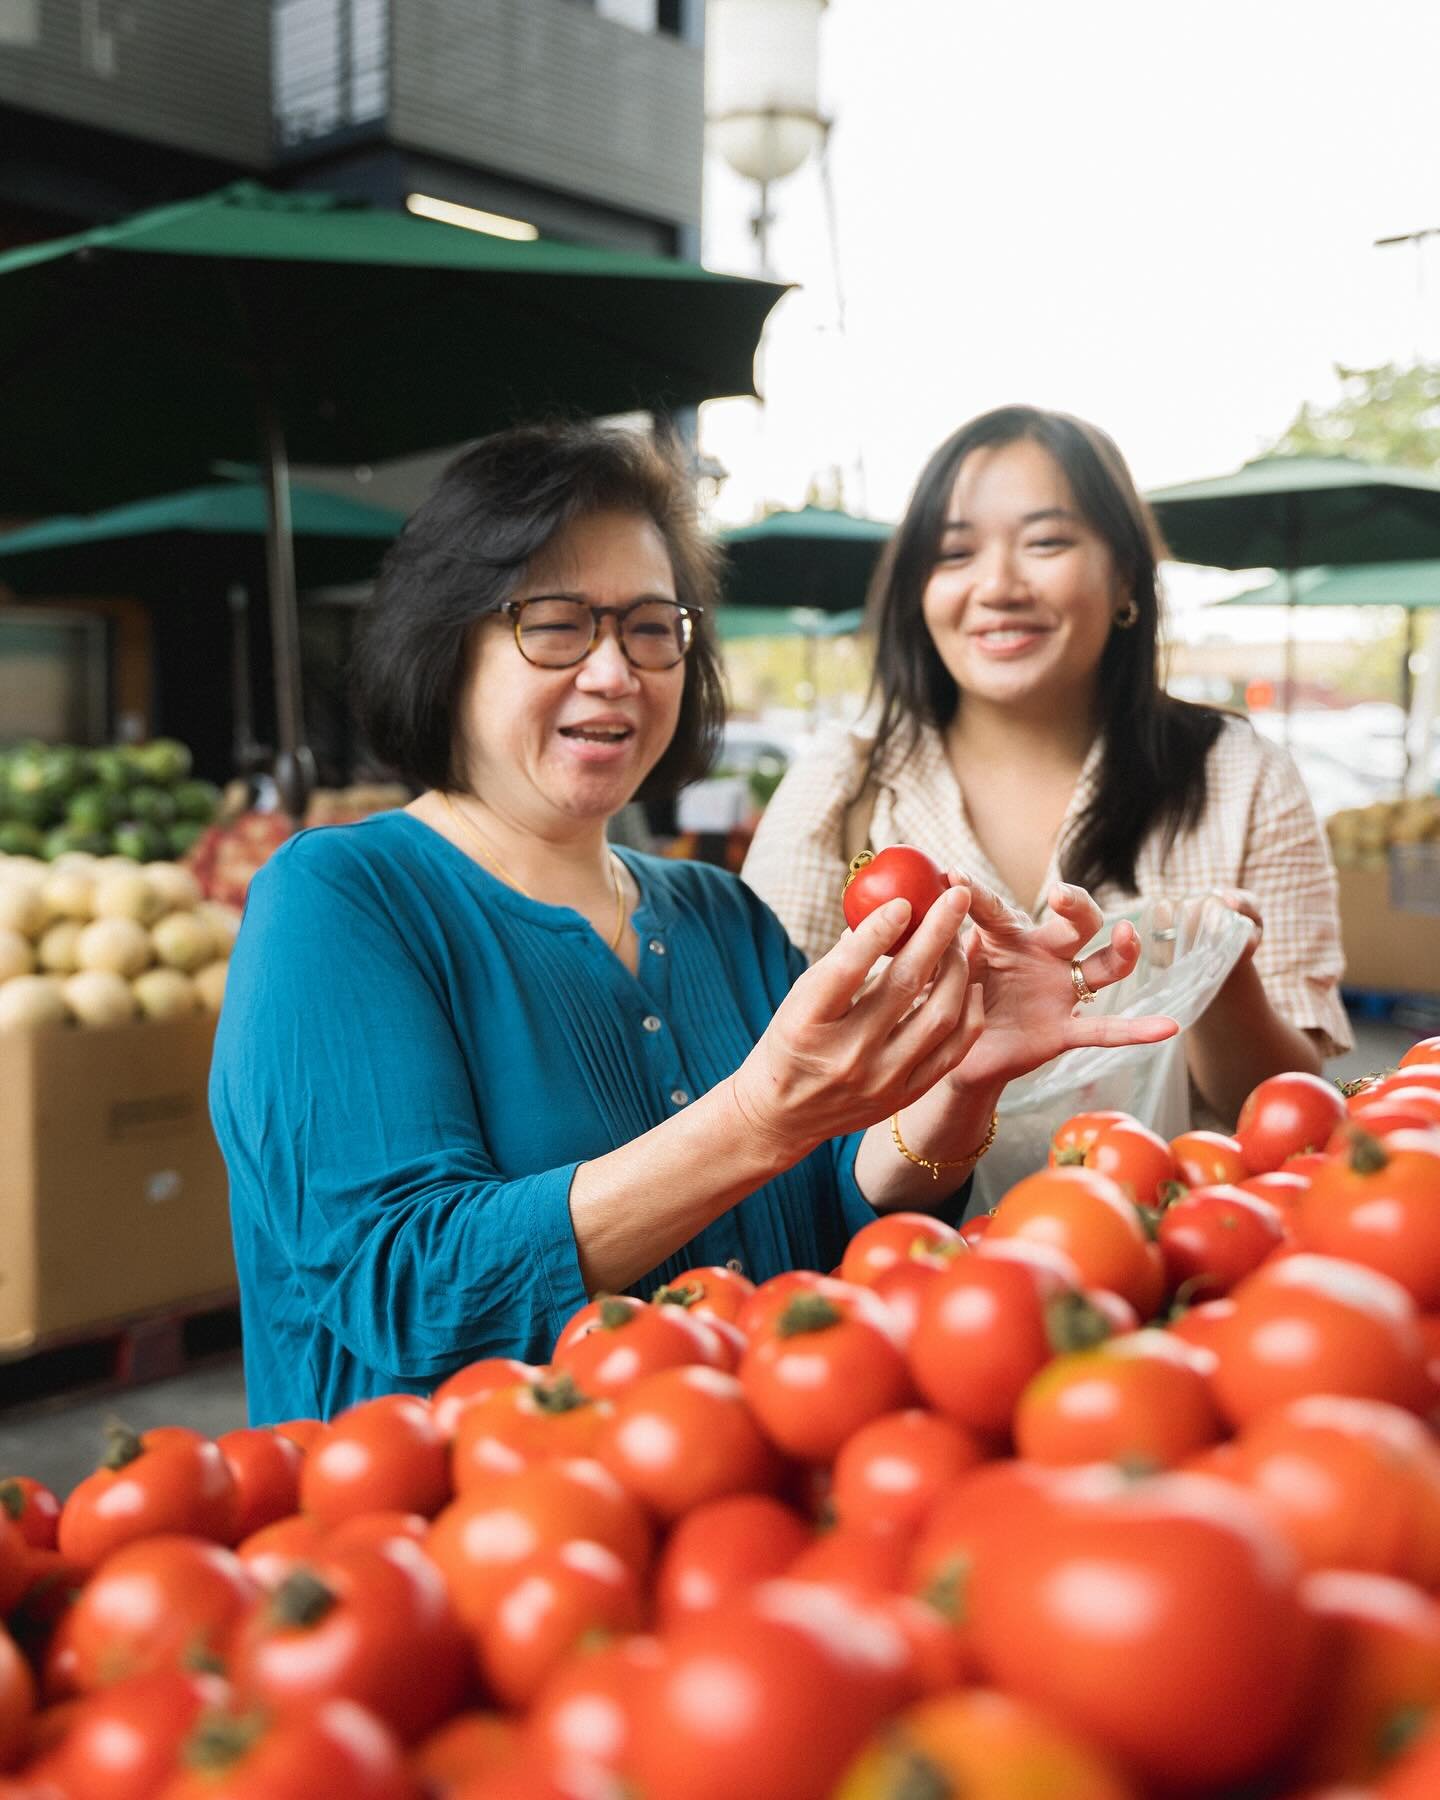 If you&rsquo;ve ever spent time with Cho Momma you&rsquo;ll know that around her you&rsquo;ll be well fed and taken care of 🧡 I grew up tagging along on her marathon grocery runs learning what to look for when picking summer tomatoes and what sauces